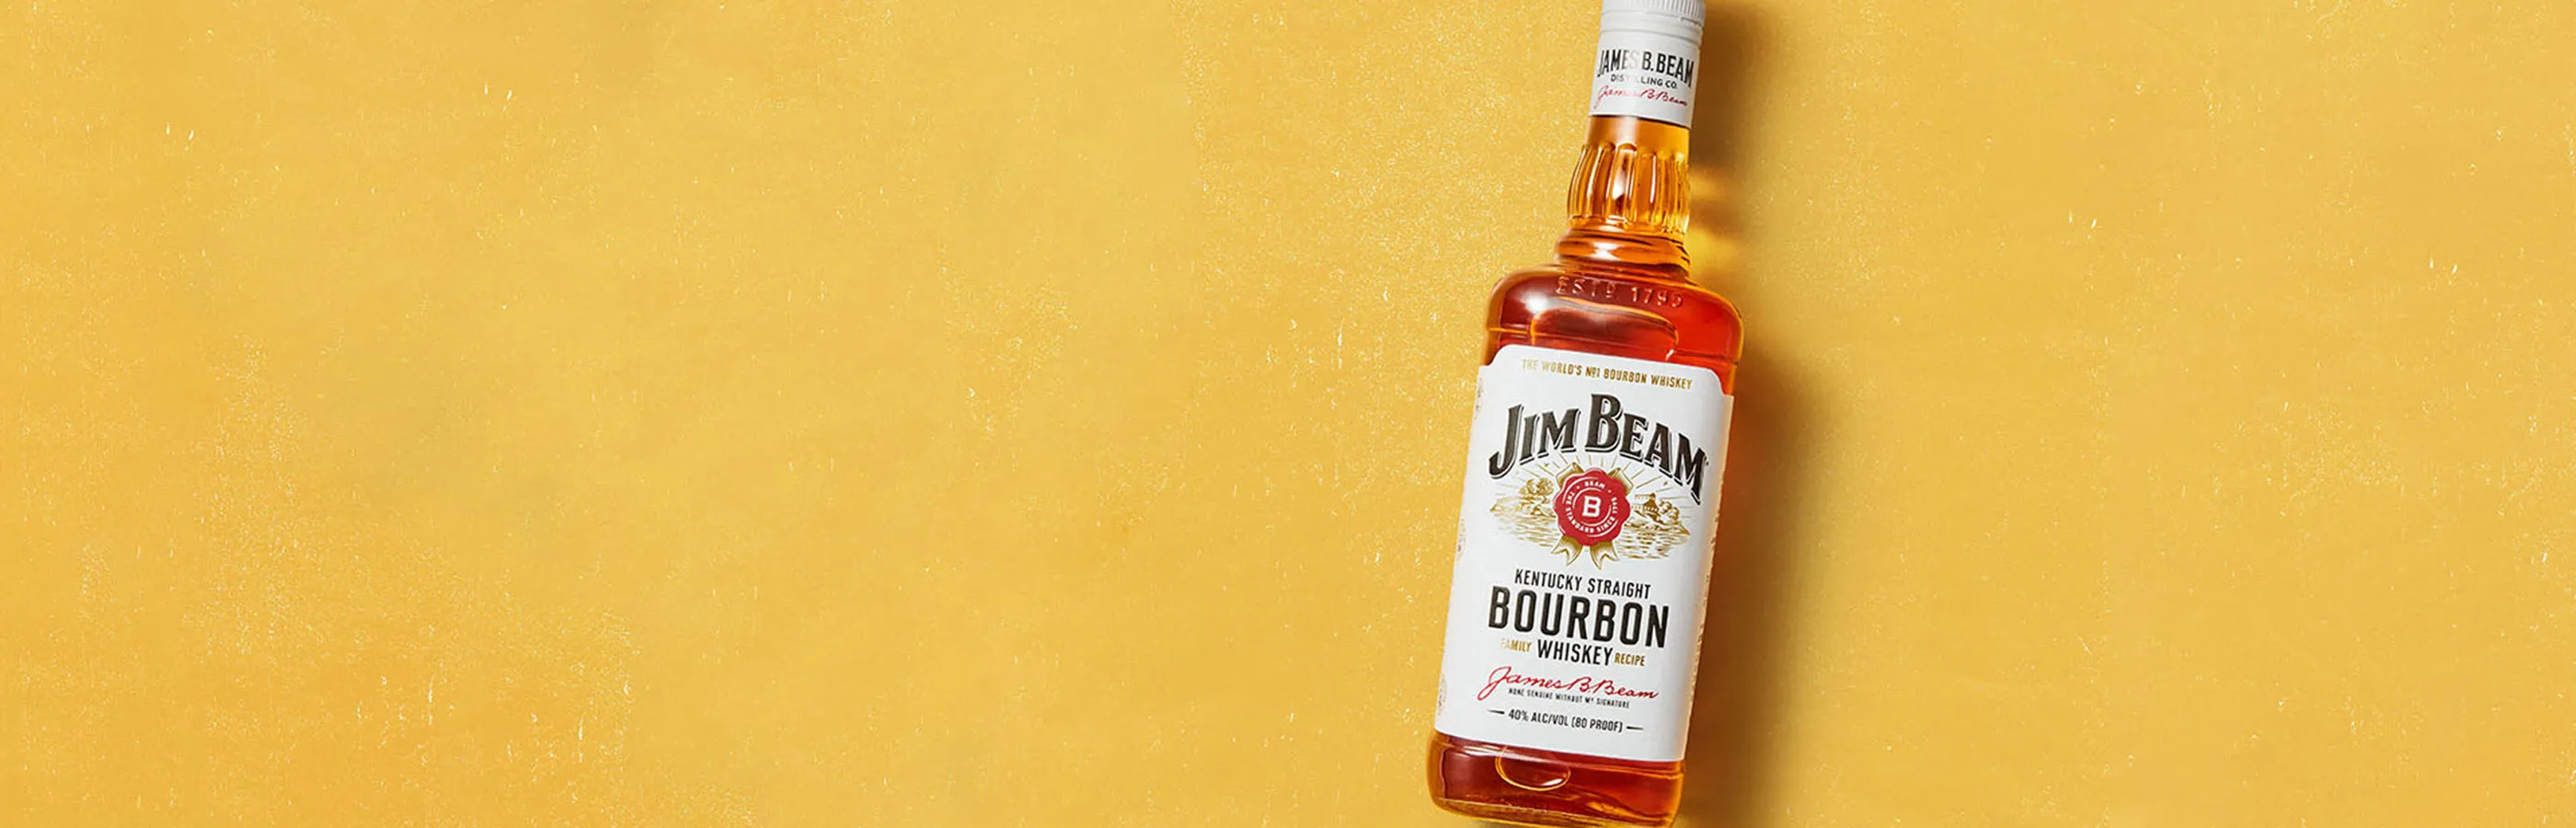 jim beam launches new global brand campaign